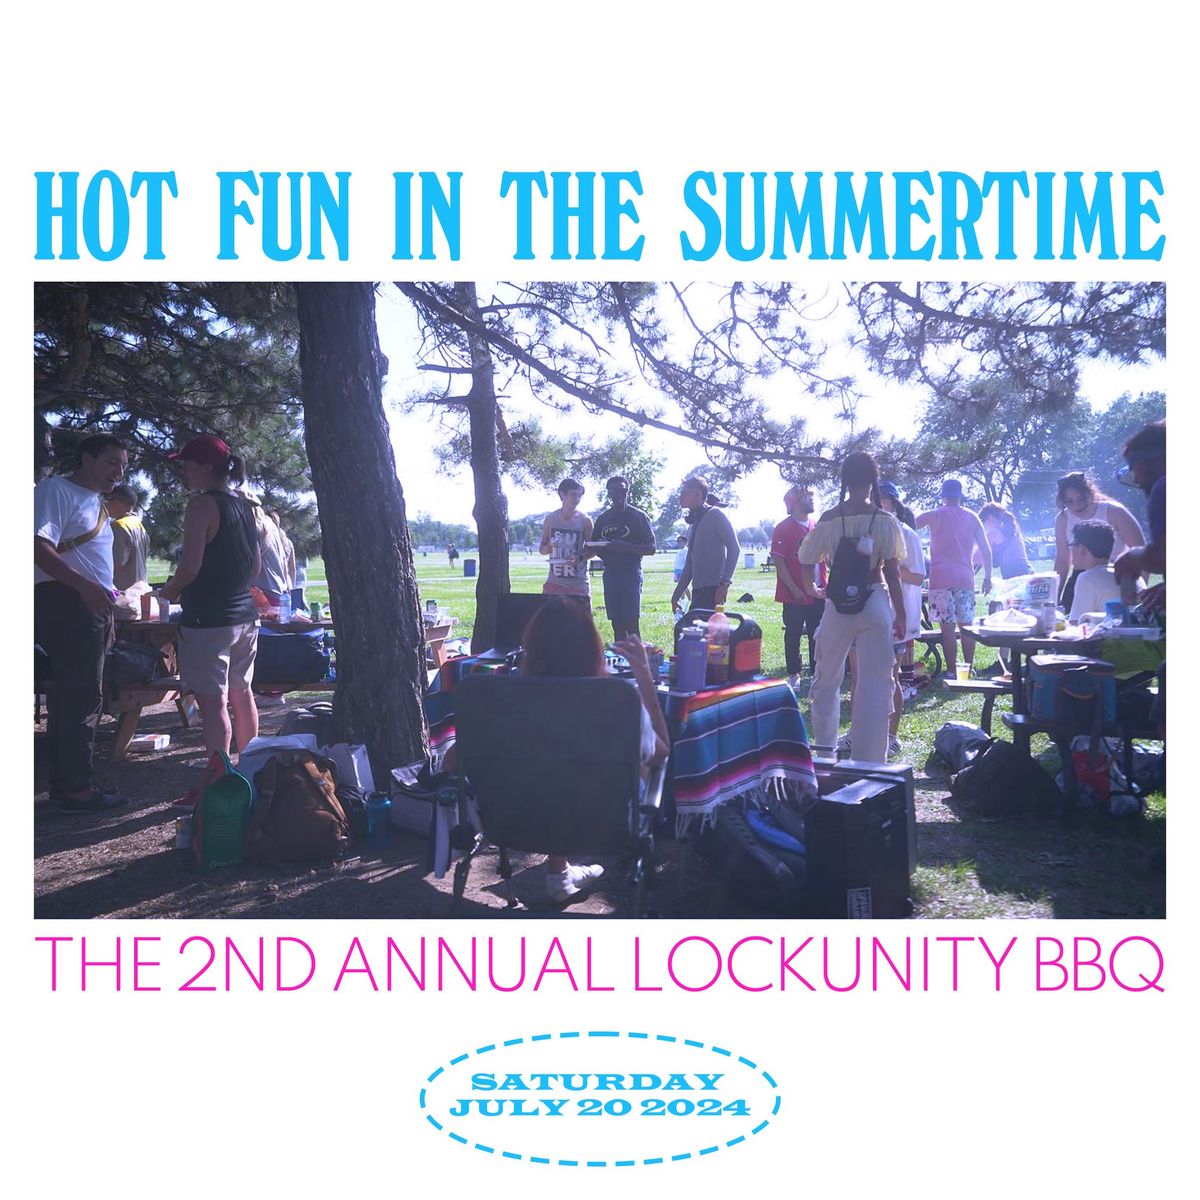 HOT FUN IN THE SUMMERTIME - The 2nd Annual LockUnity BBQ